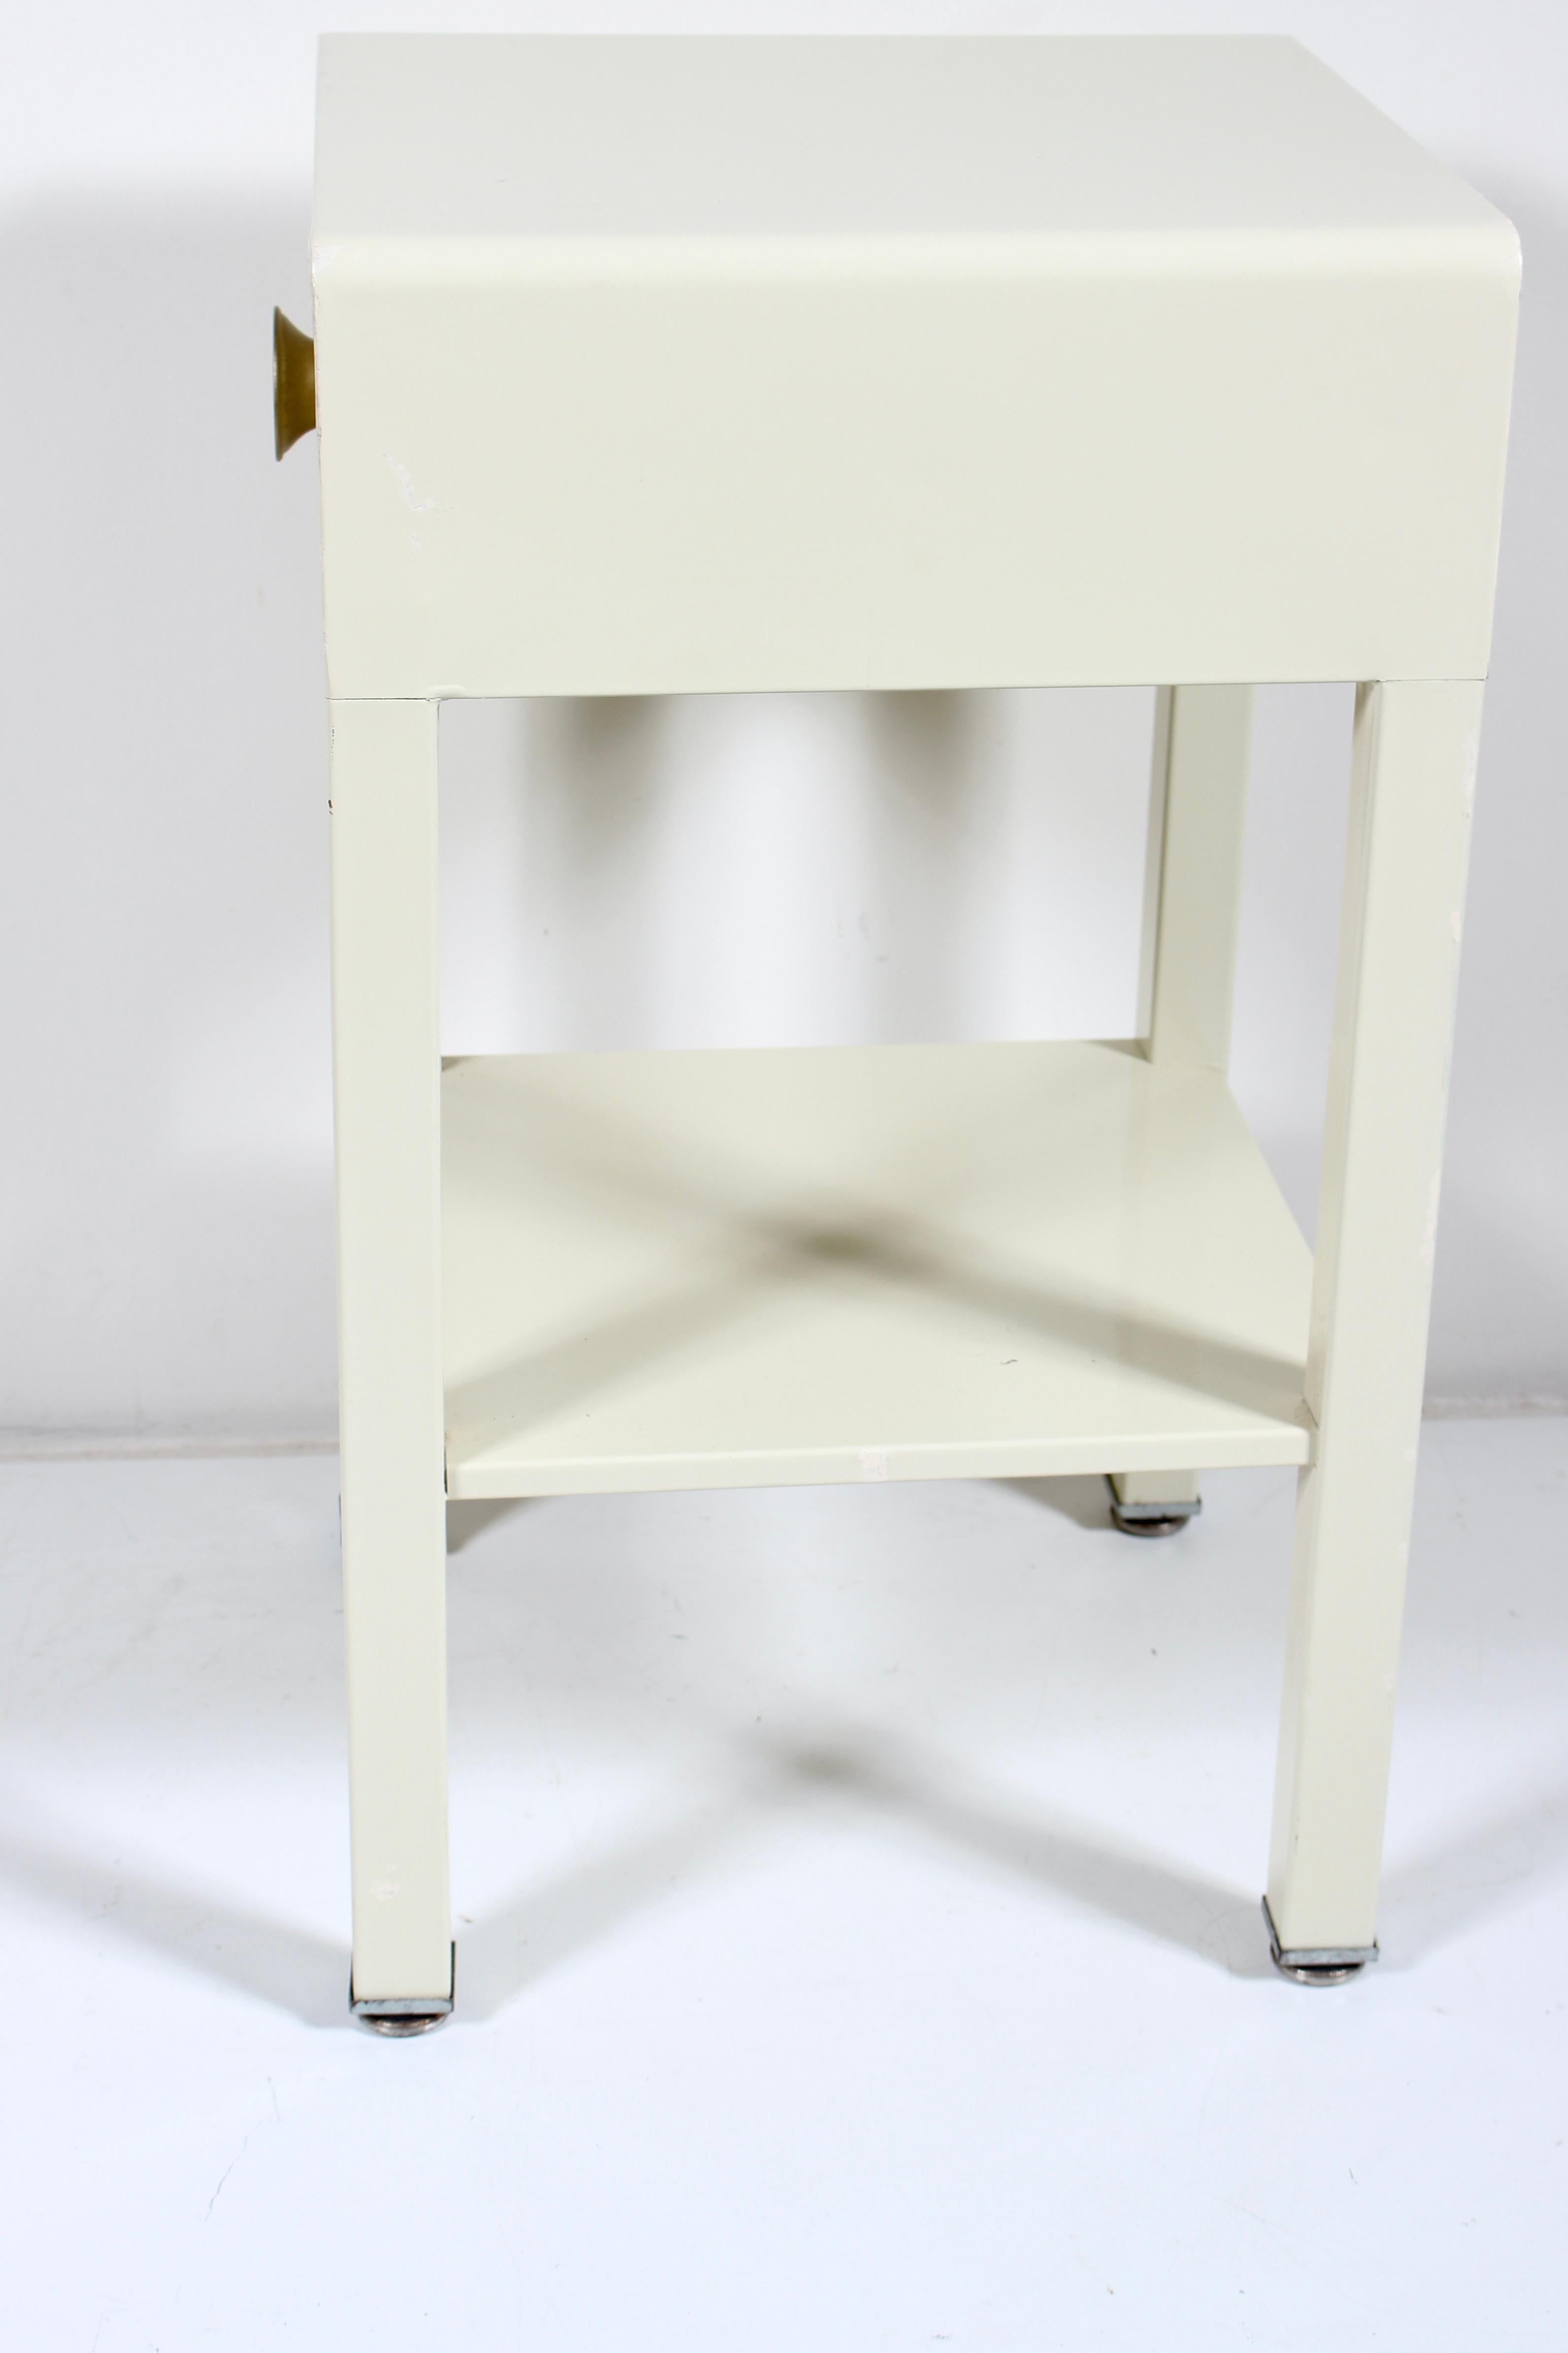 Norman Bel Geddes for Simmons Off White Enameled Steel Night Stand, 1930's For Sale 3